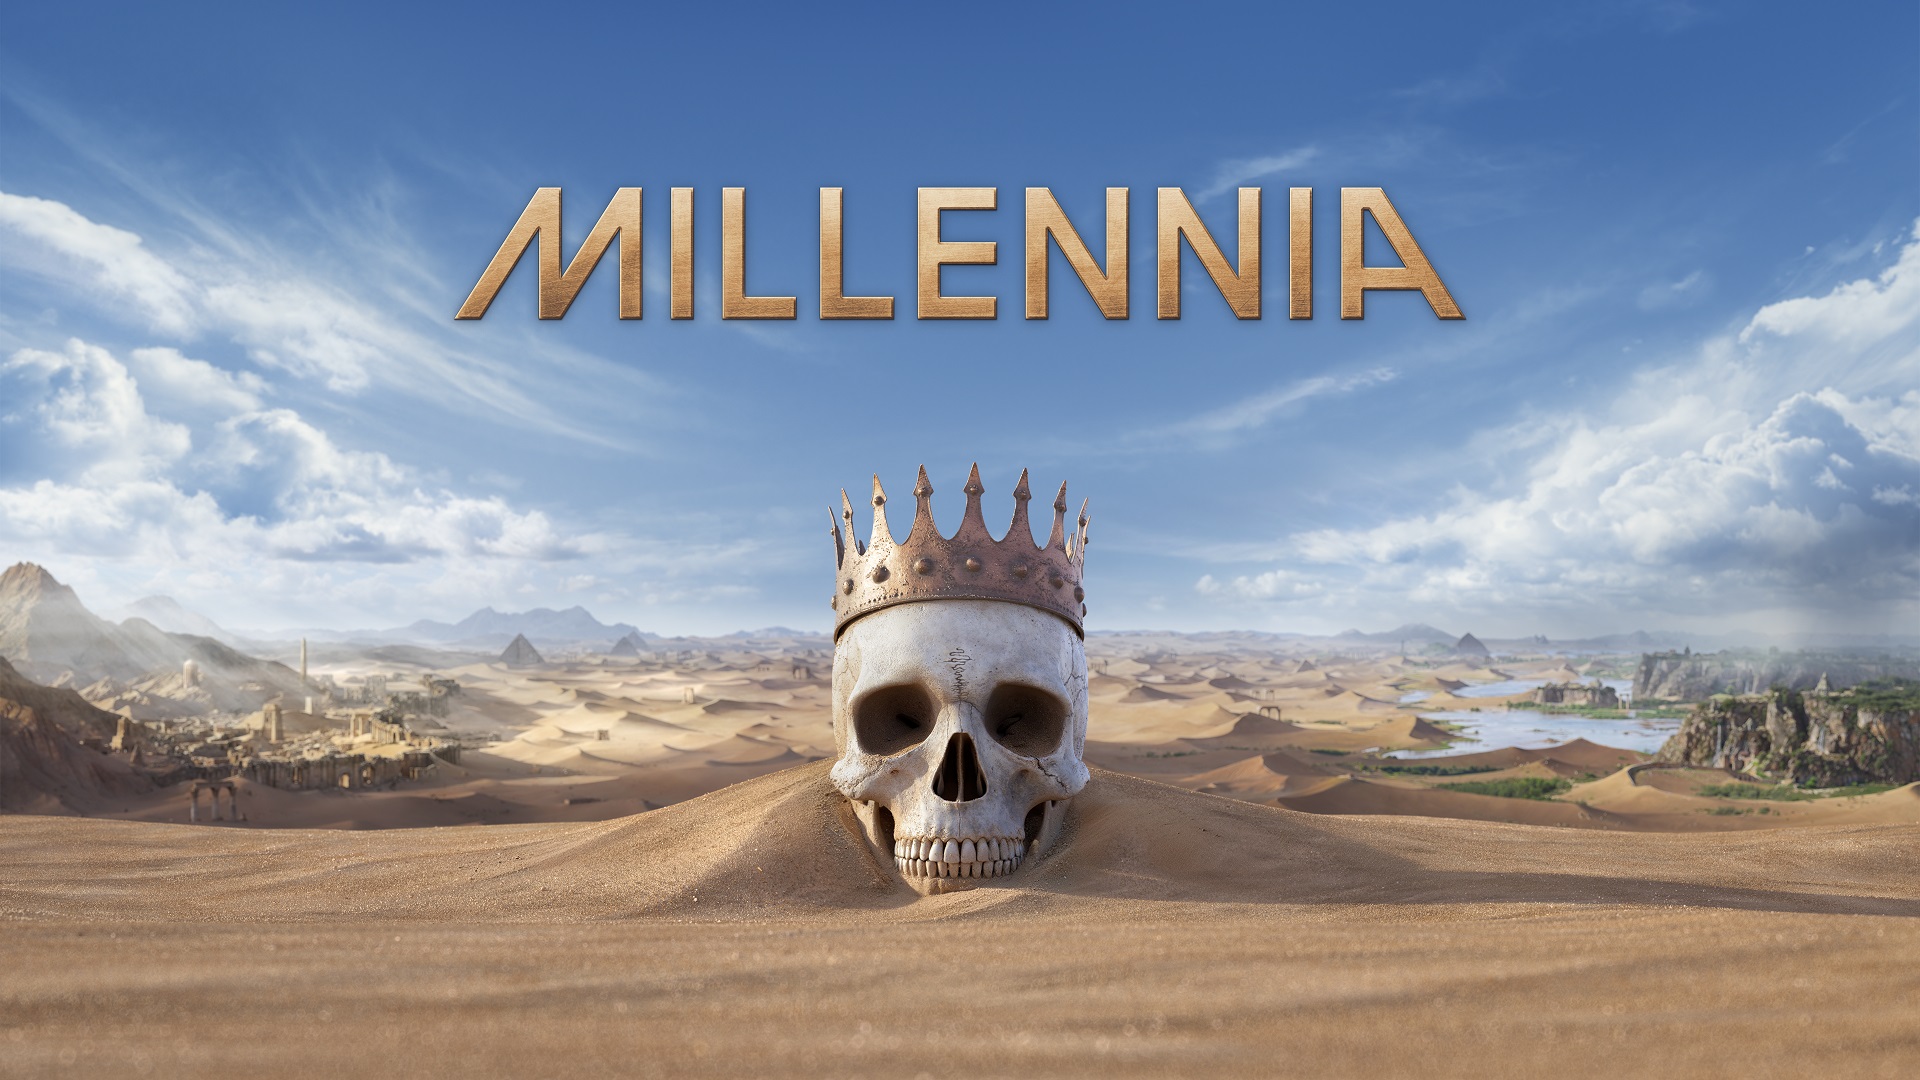 Civ-like 4X strategy game Millenia expands onto PC in March